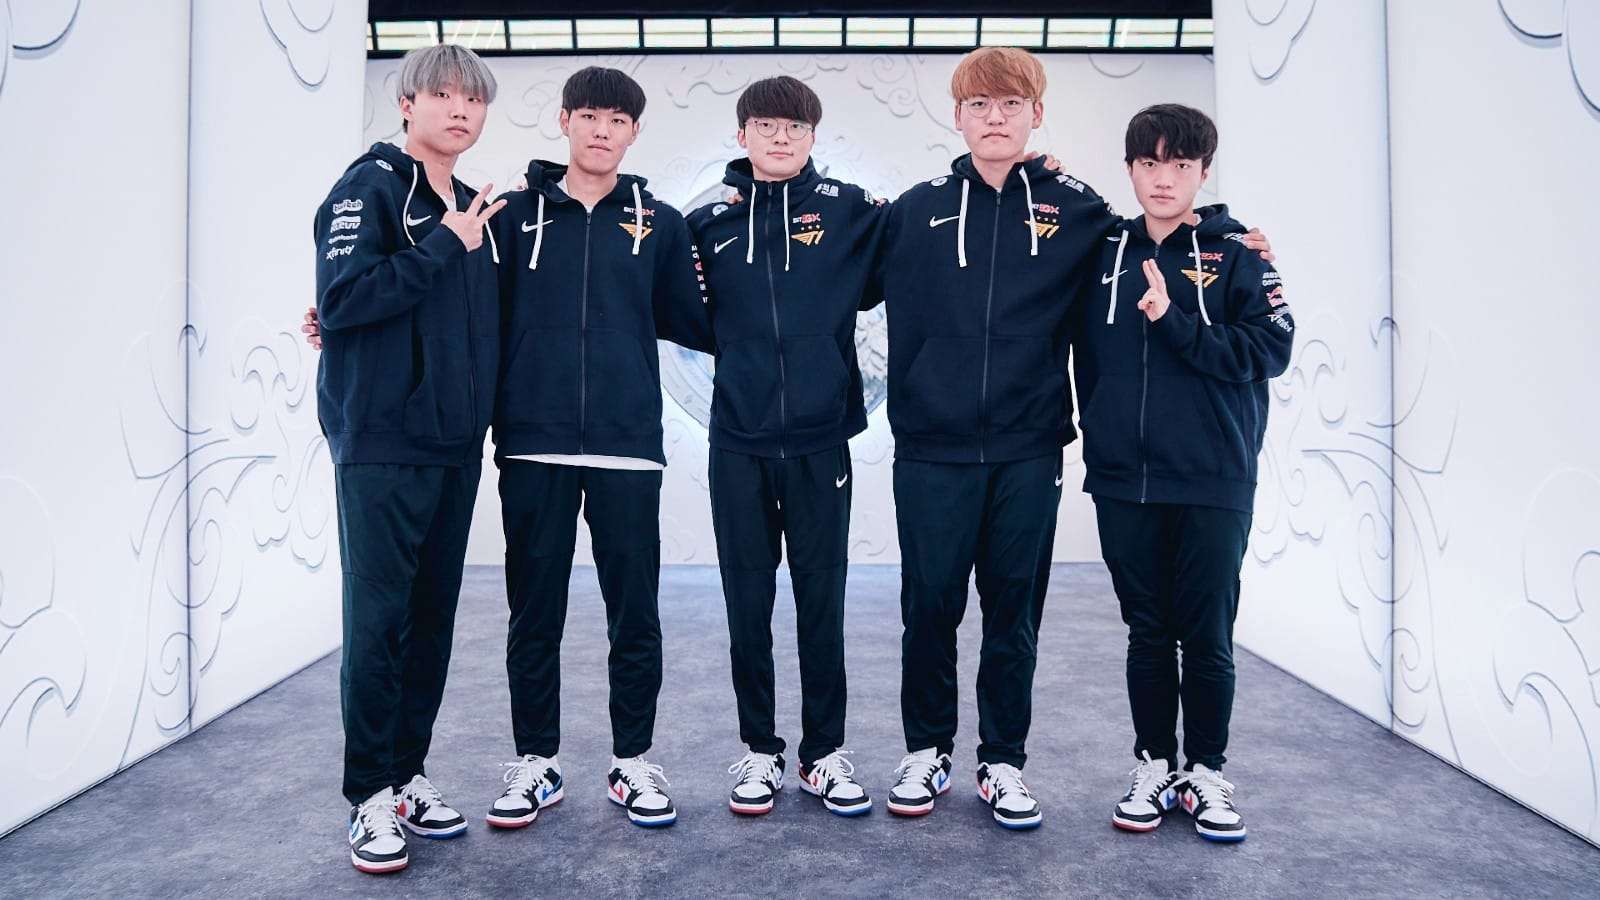 T1 group shot at Worlds 2021